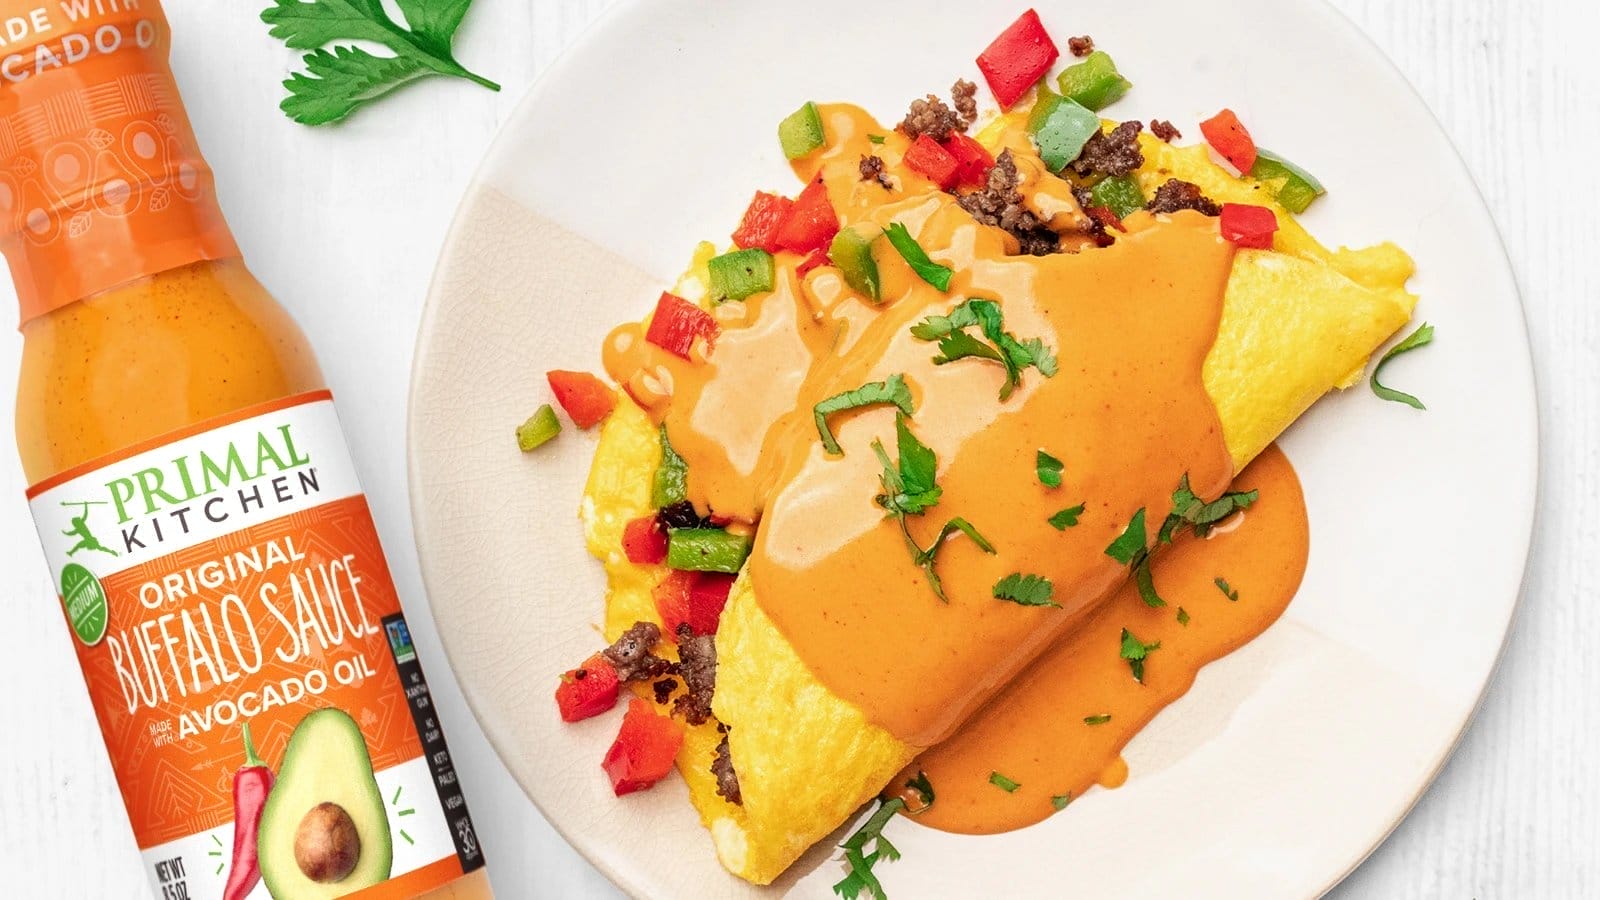 Primal Kitchen Buffalo Sauce drizzled on omelette